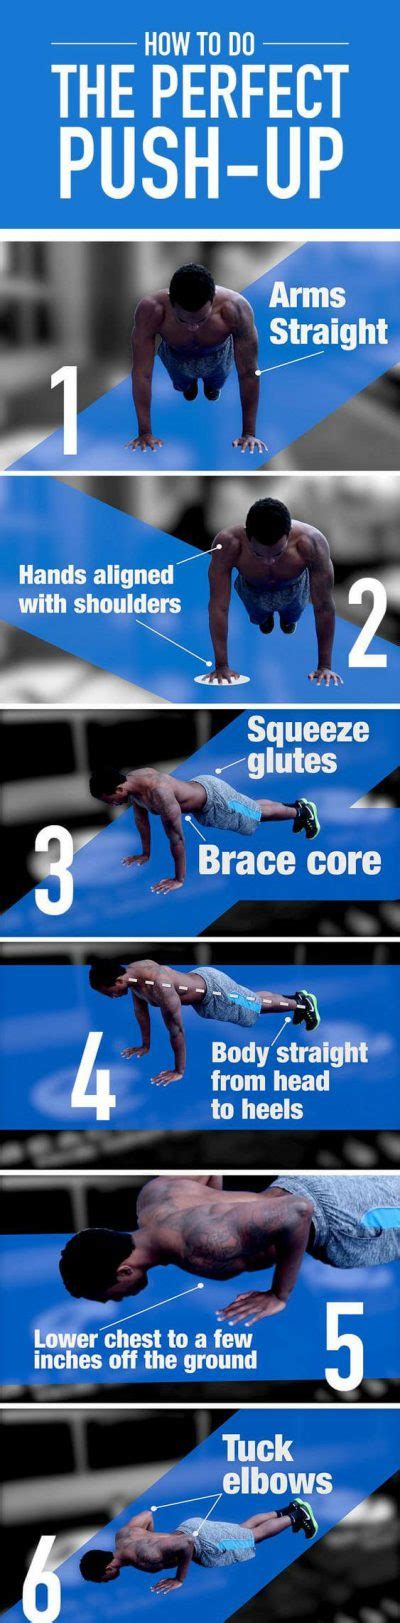 5 Simple Tips For Mastering The Perfect Push Up